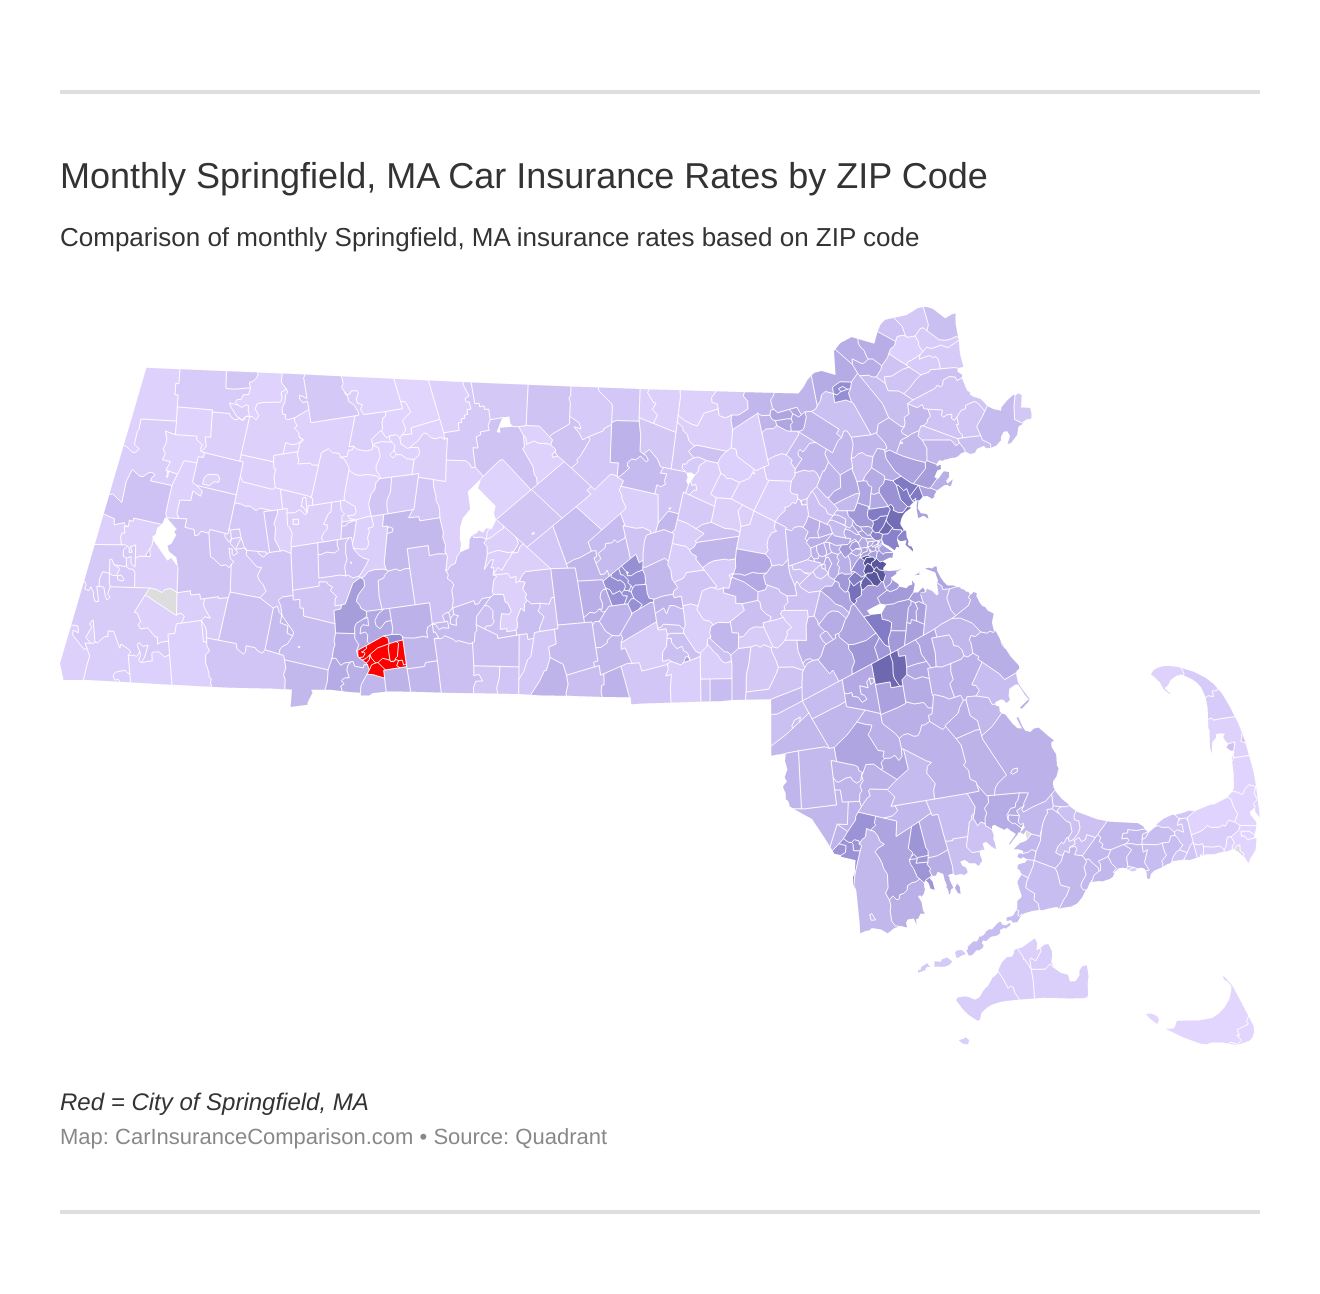 Monthly Springfield, MA Car Insurance Rates by ZIP Code